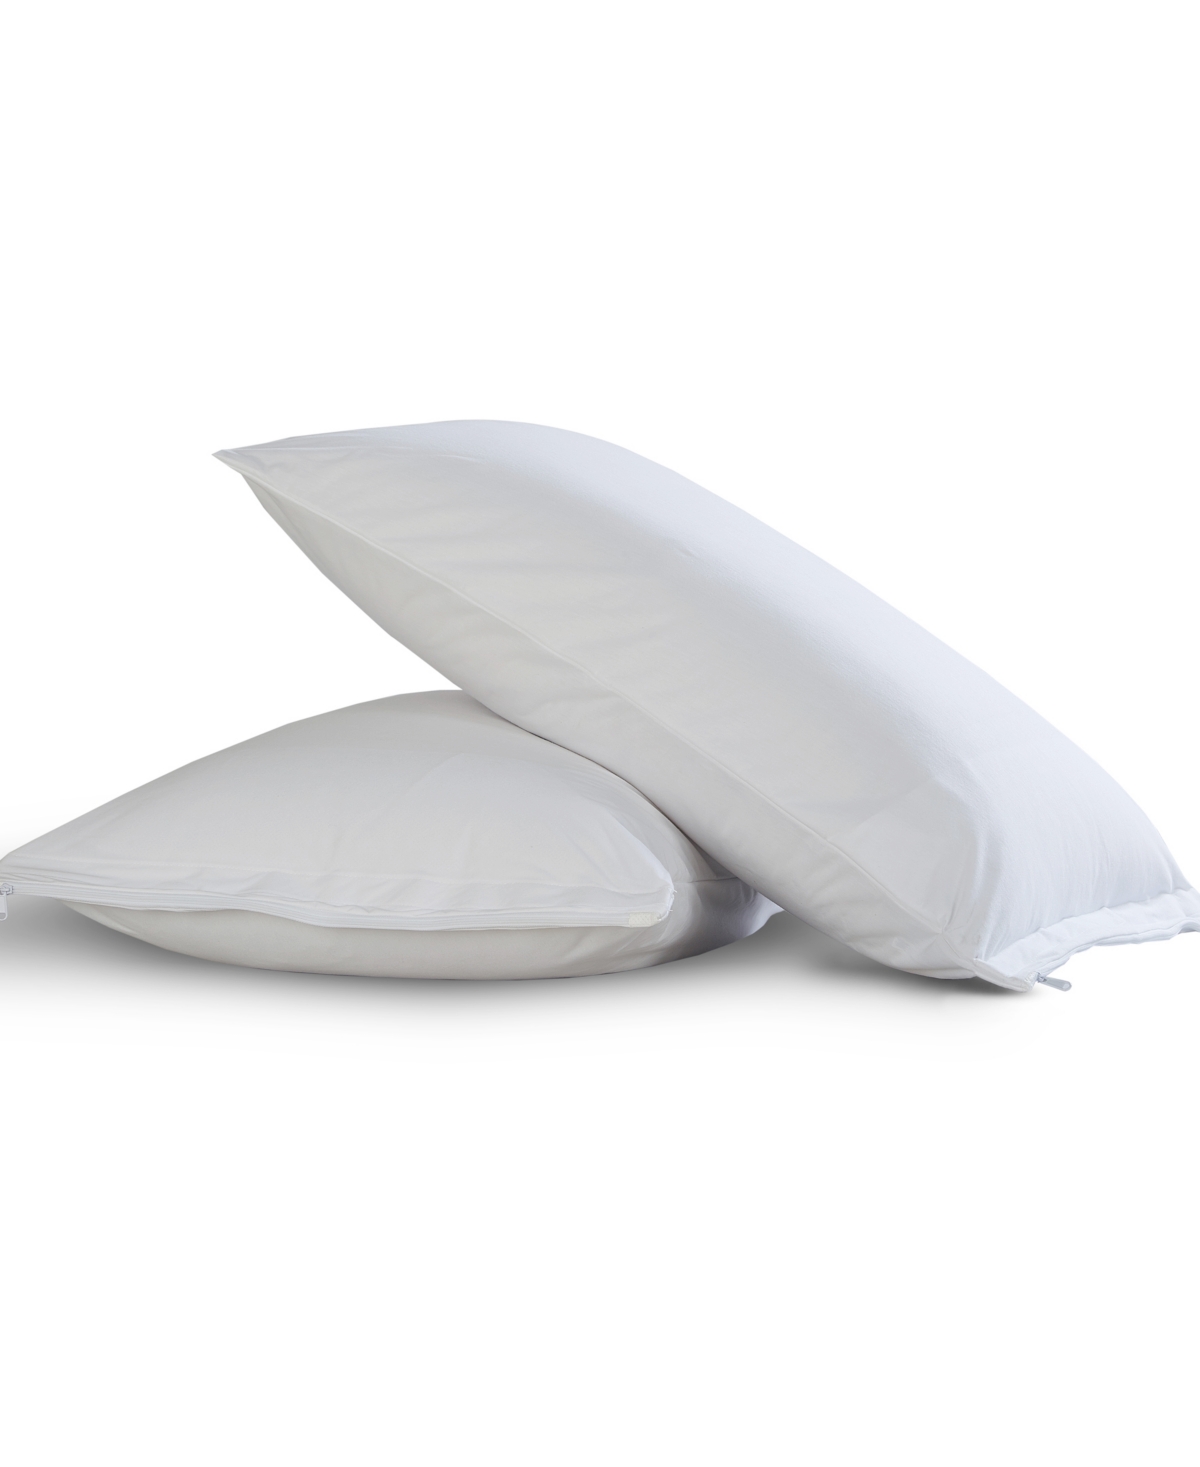 All-In-One Cool Queen Pillow Protectors with Bed Bug Blocker 2-Pack